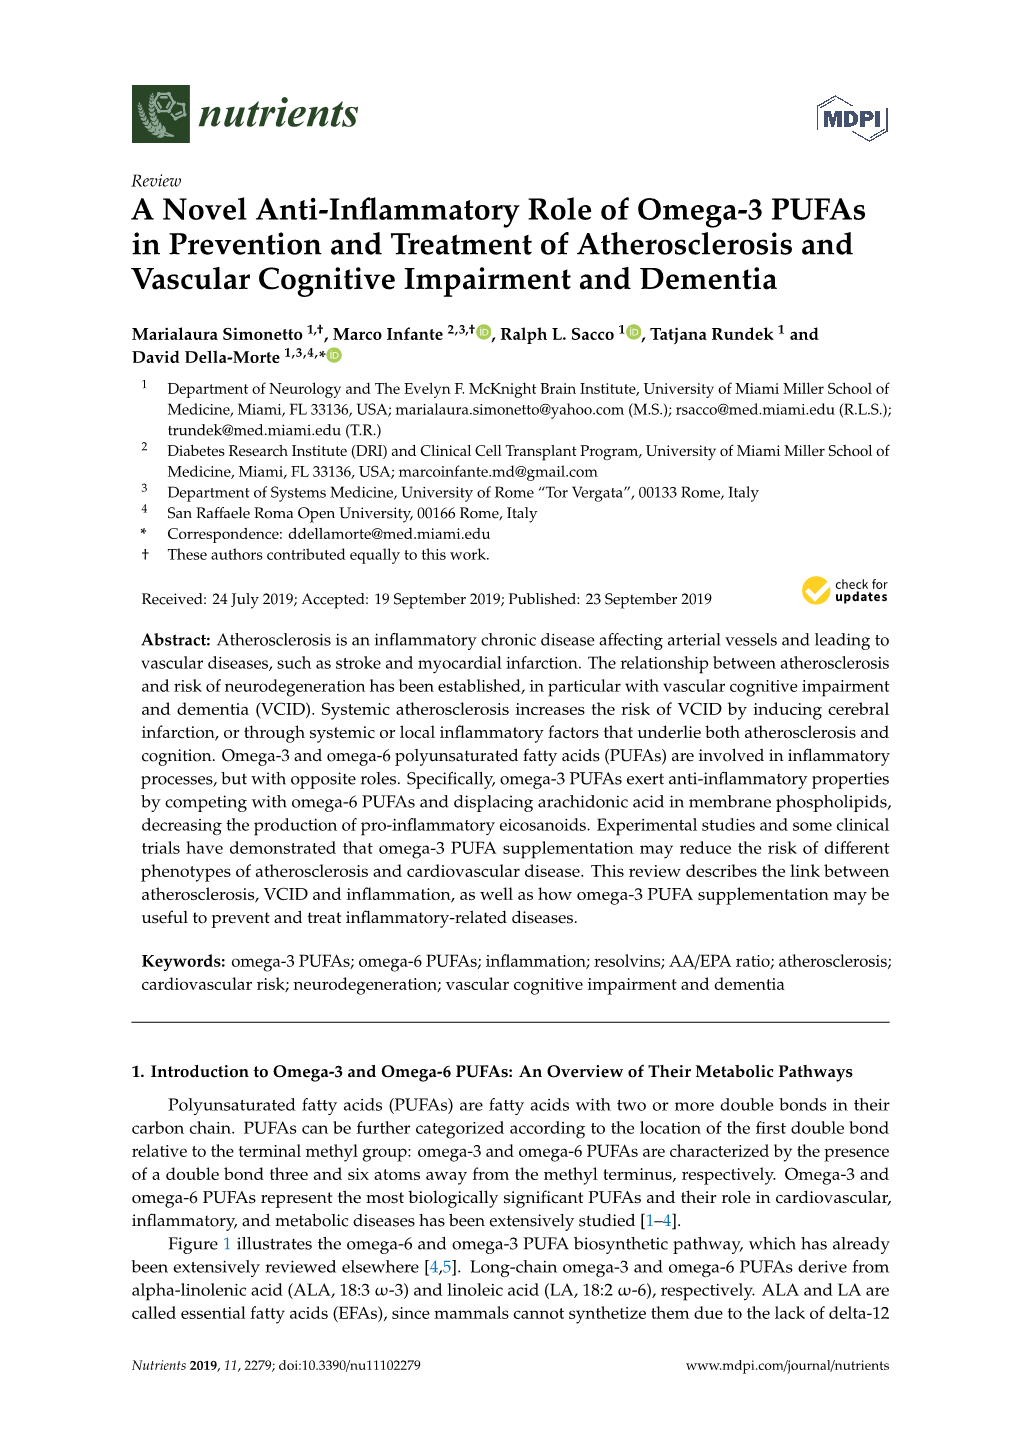 A Novel Anti-Inflammatory Role of Omega-3 Pufas in Prevention And